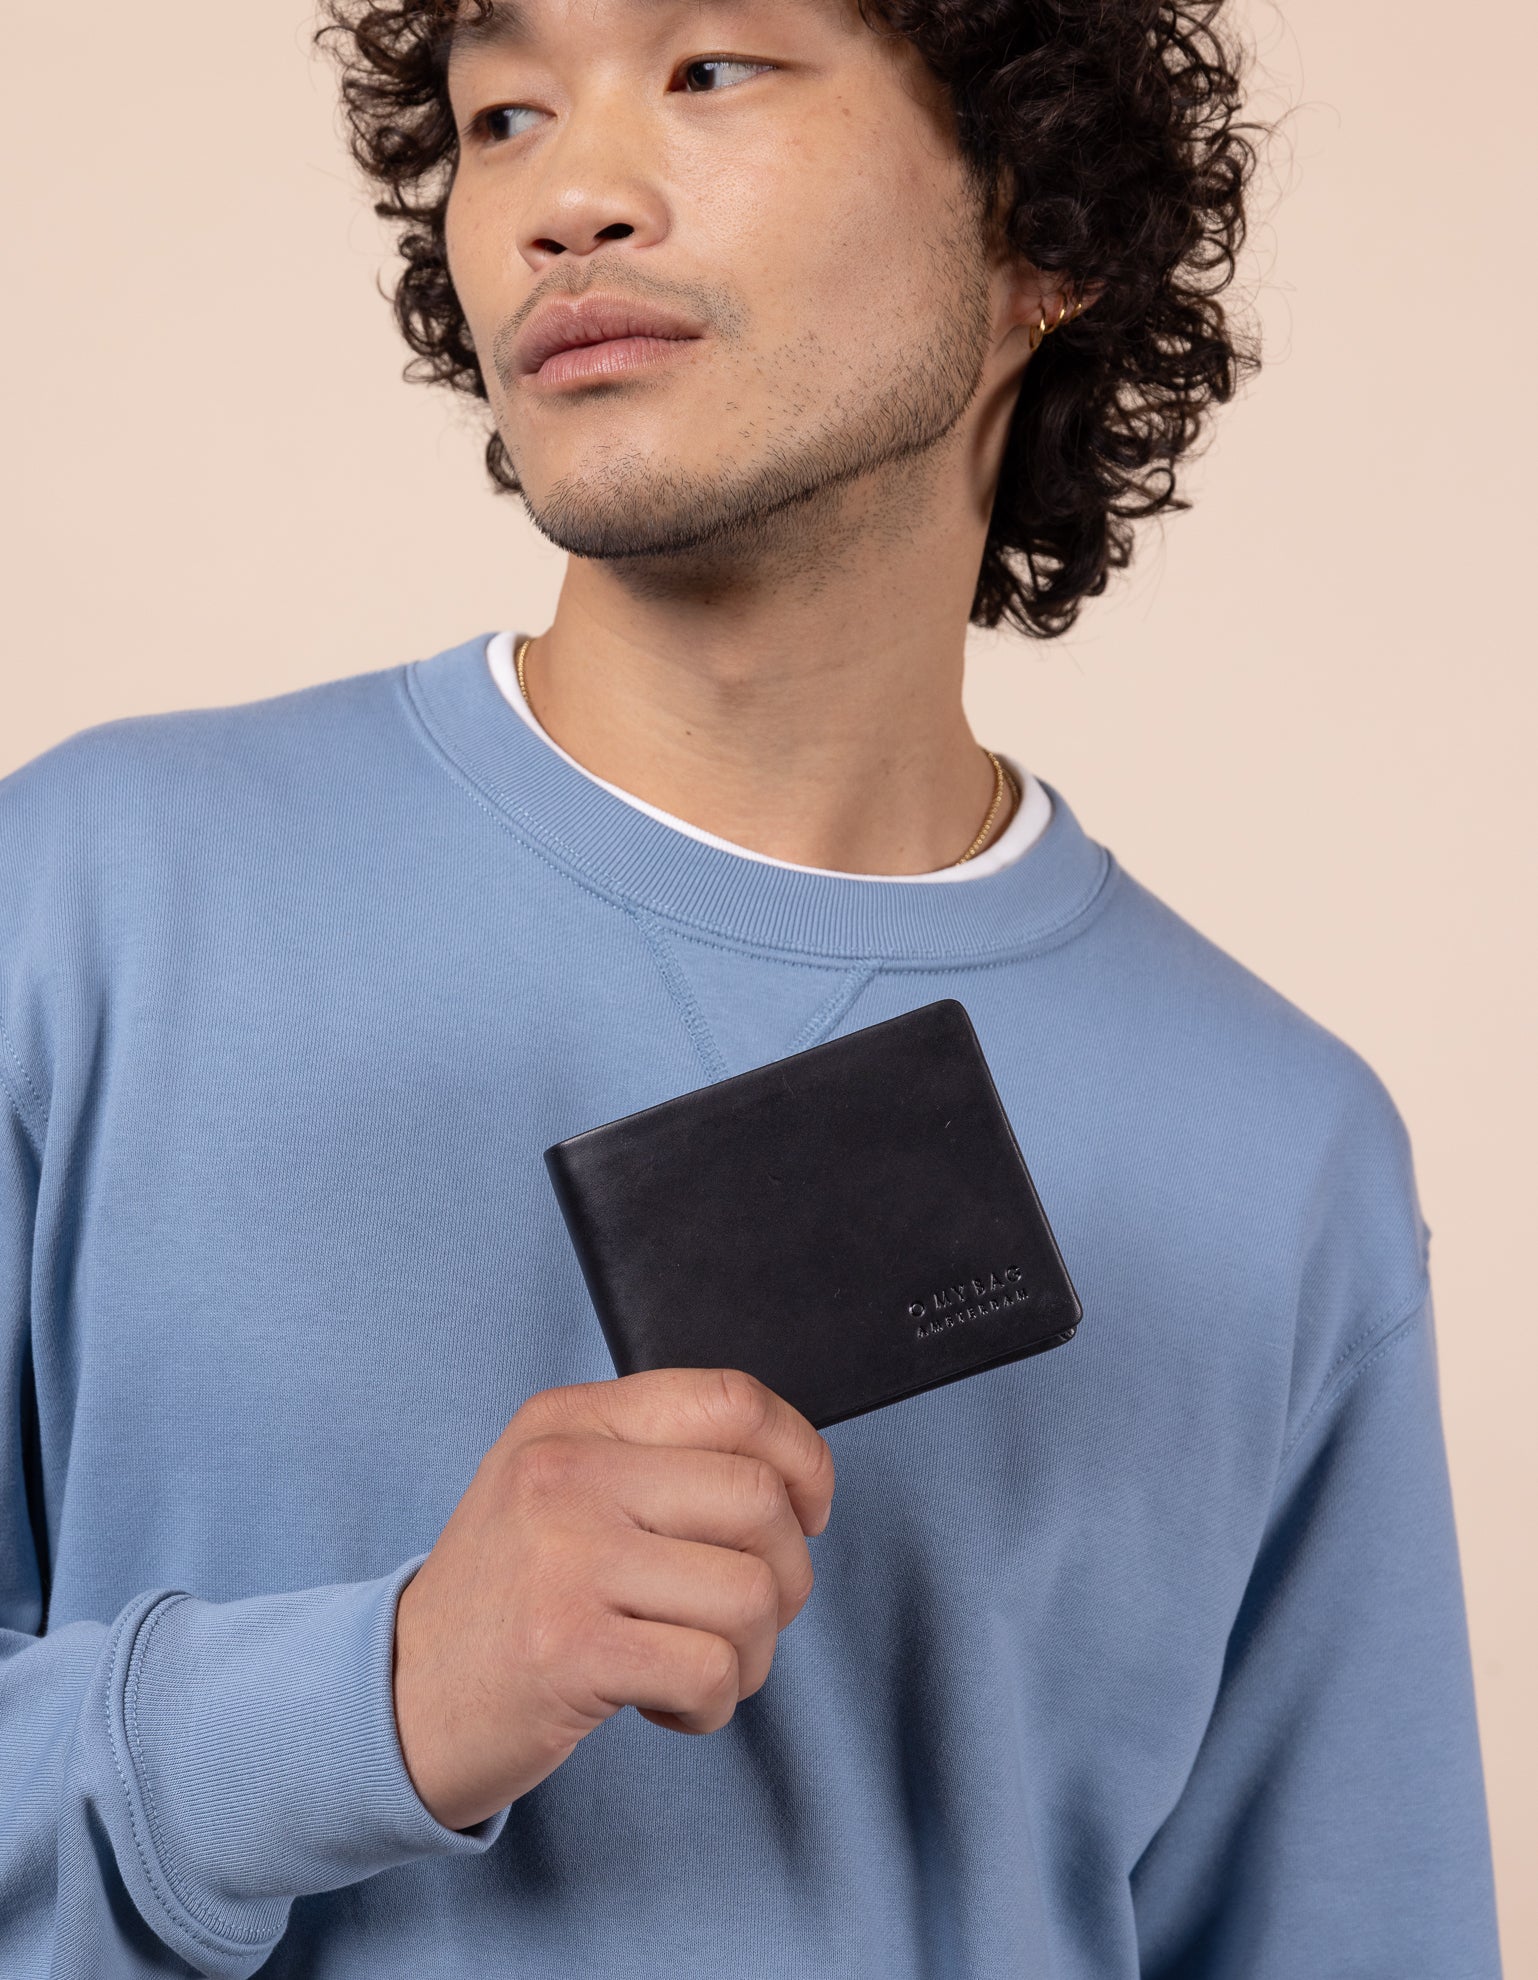 Male model with Joshua leather wallet